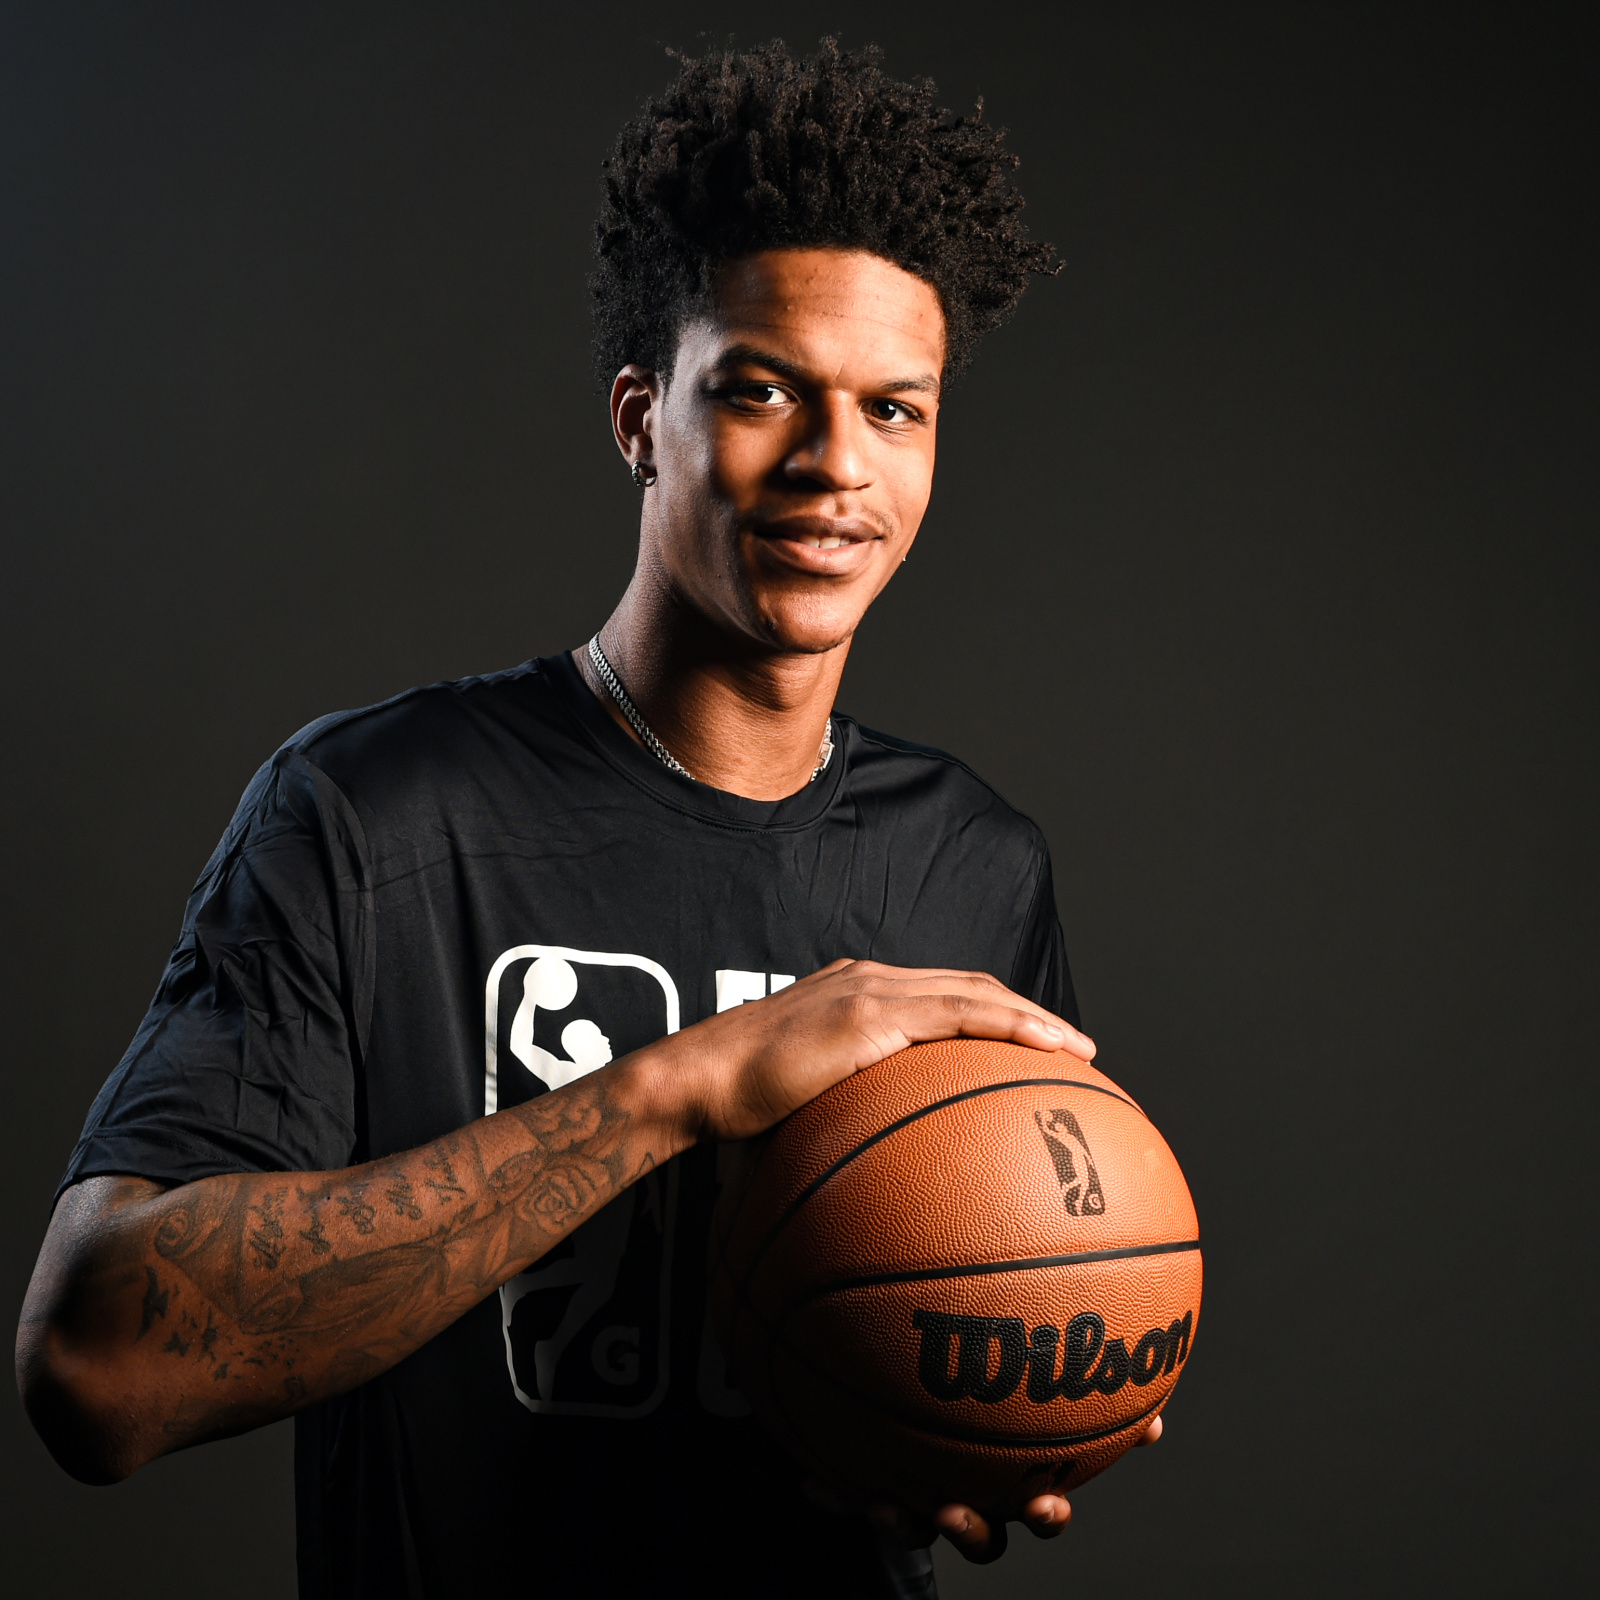 Shareef O'Neal Generating Buzz From NBA Teams, Several Workouts